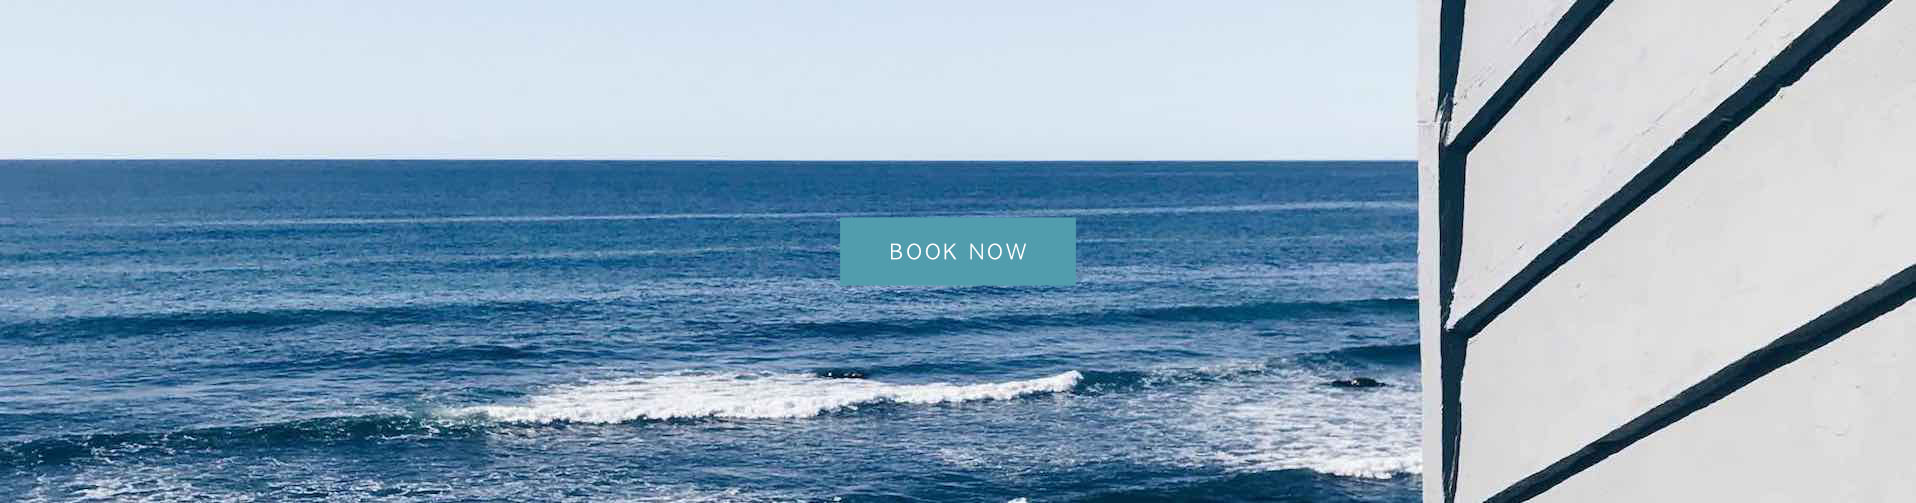 Indulge yourself and stay seaside at The Mariner on the east coast of Tasmania